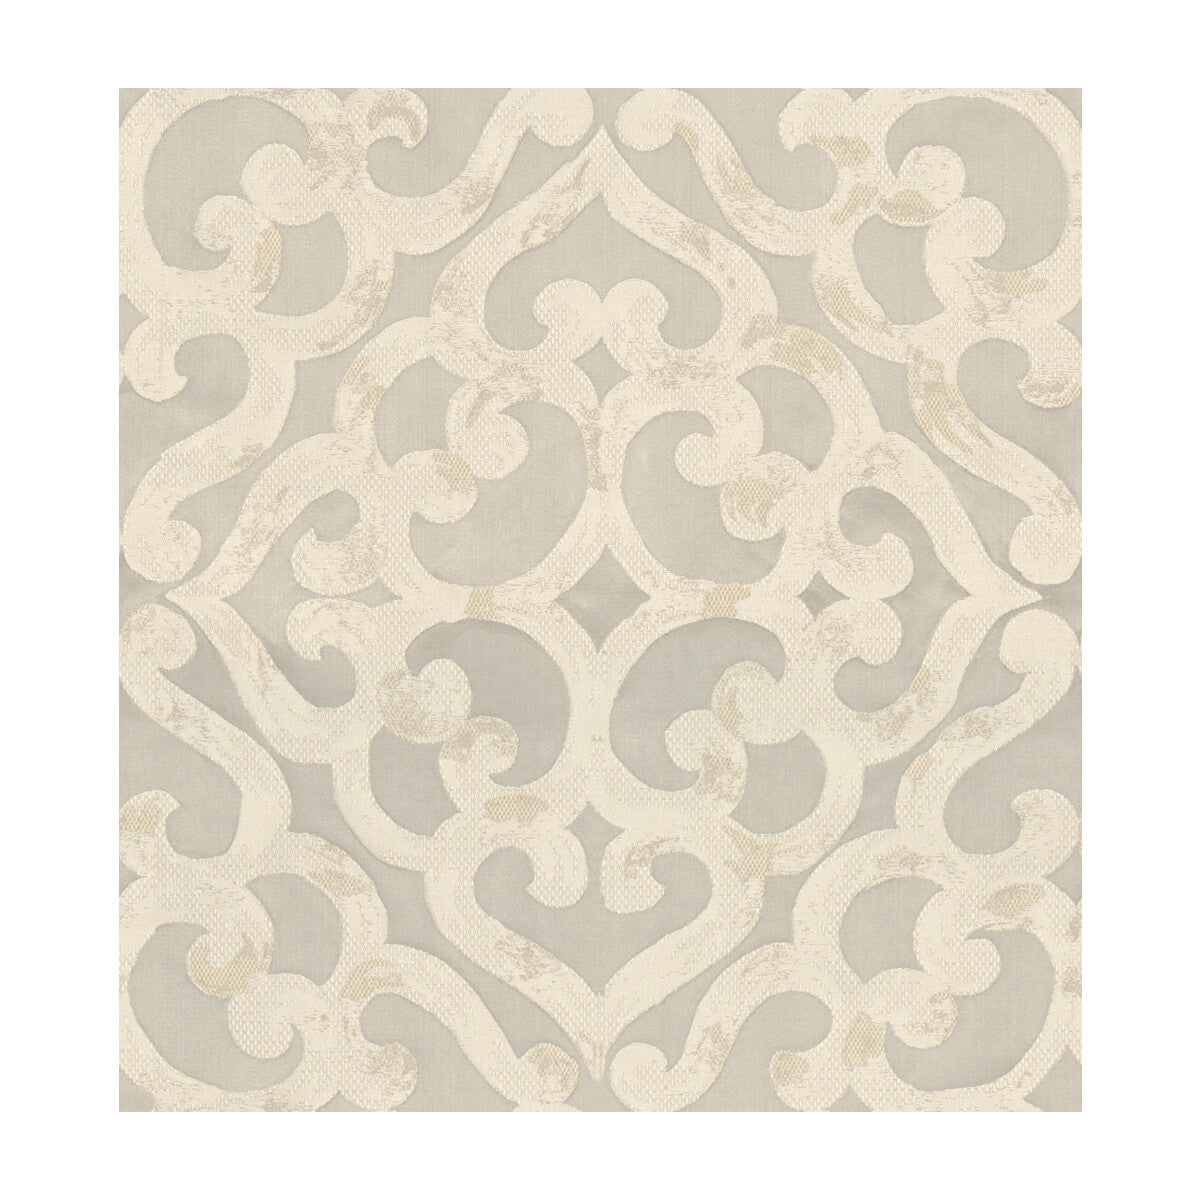 Kurrajong fabric in beige color - pattern 33799.1116.0 - by Kravet Design in the Candice Olson collection